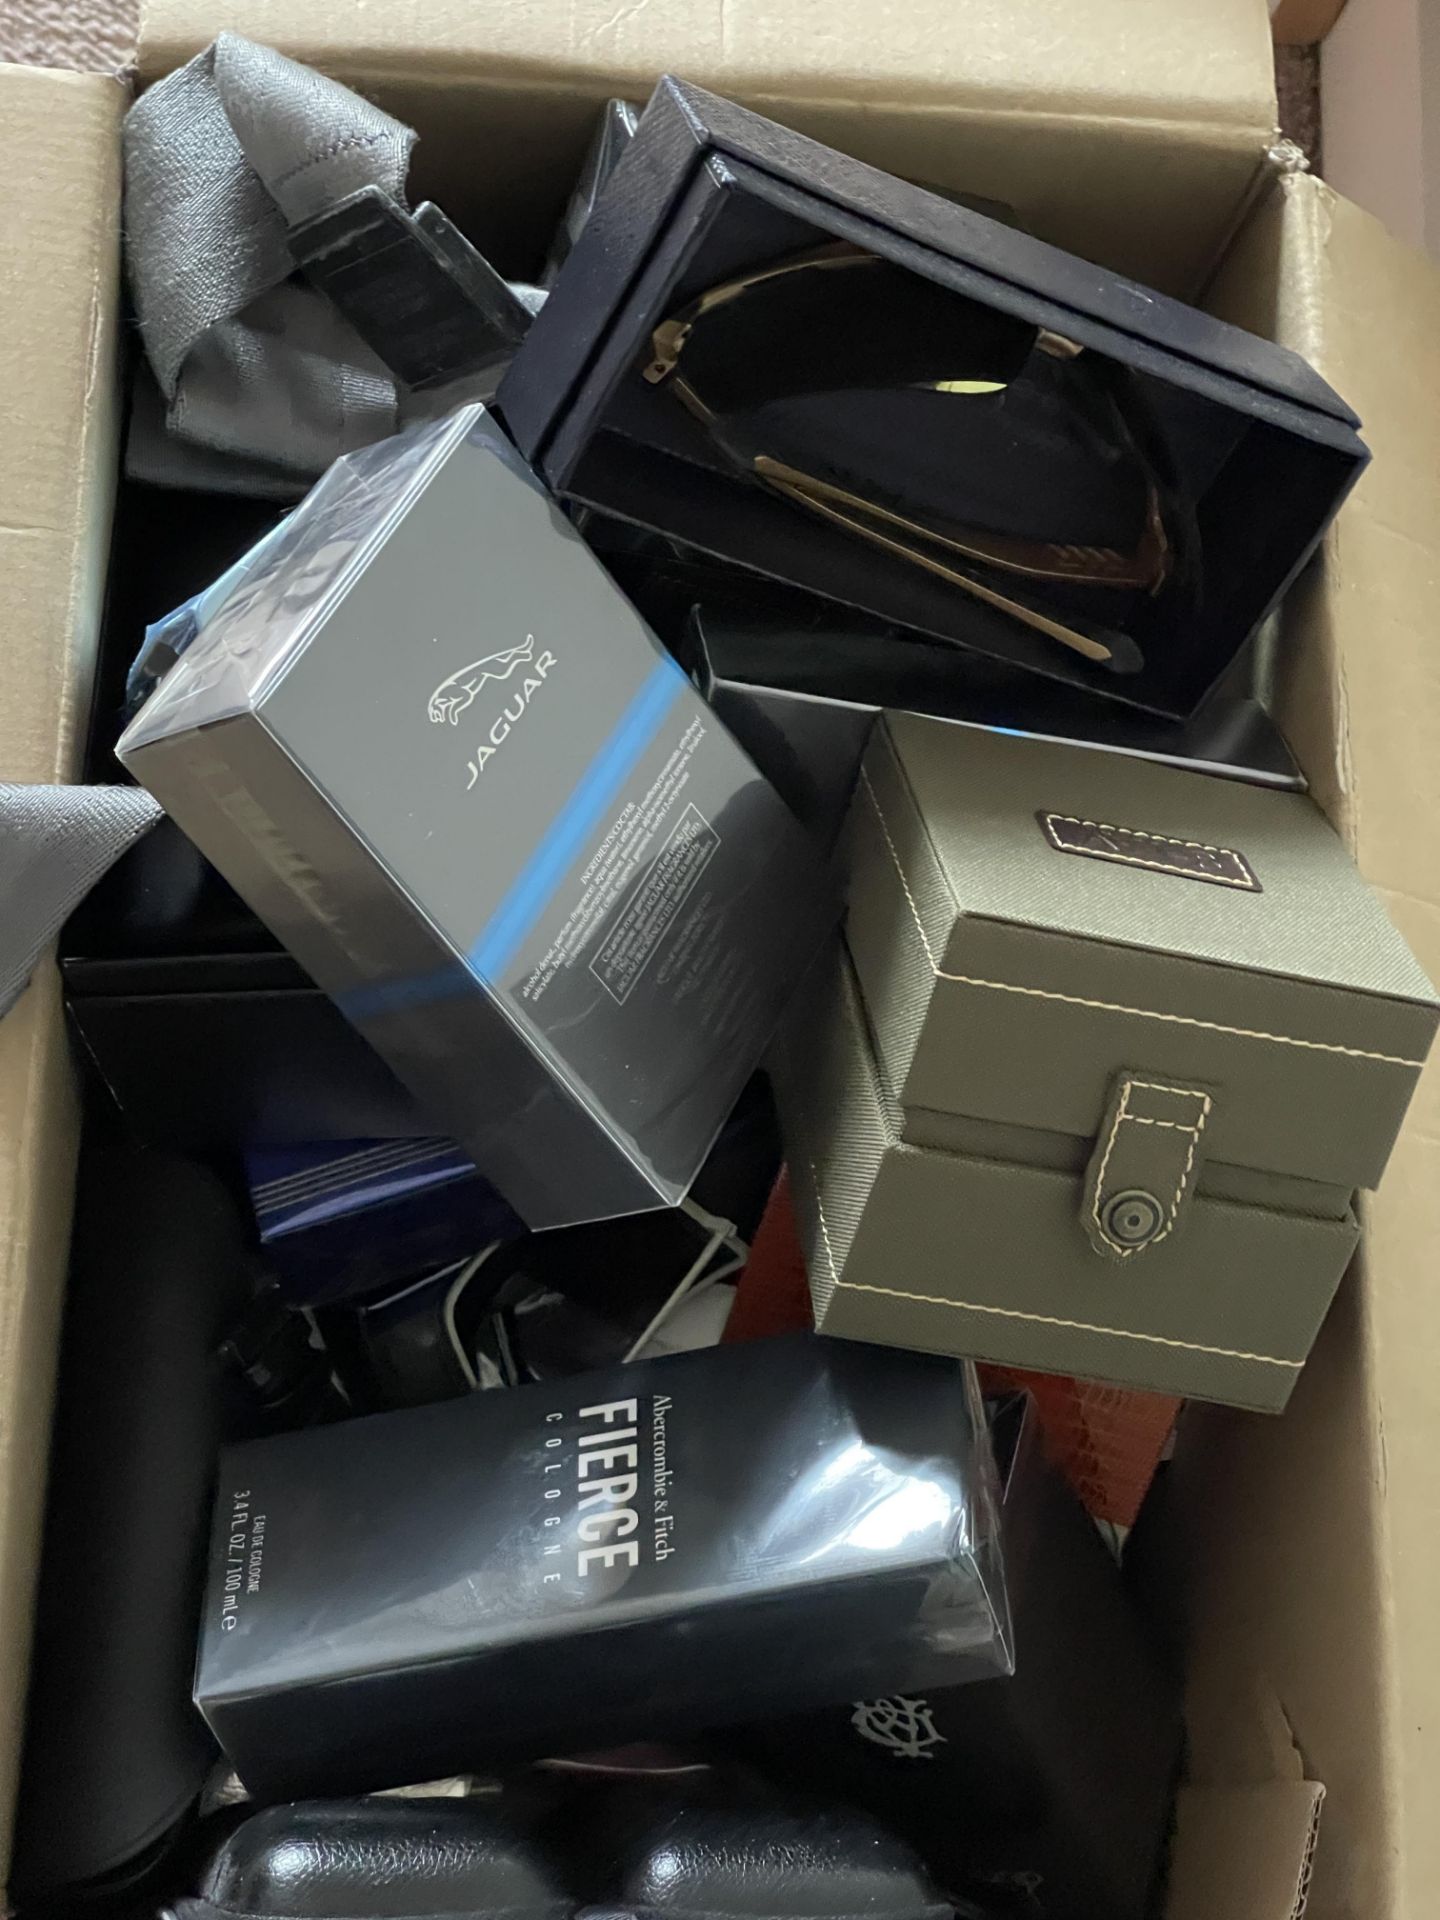 Aftershaves mystery box containing watches sunglasses ect worth - Image 14 of 31